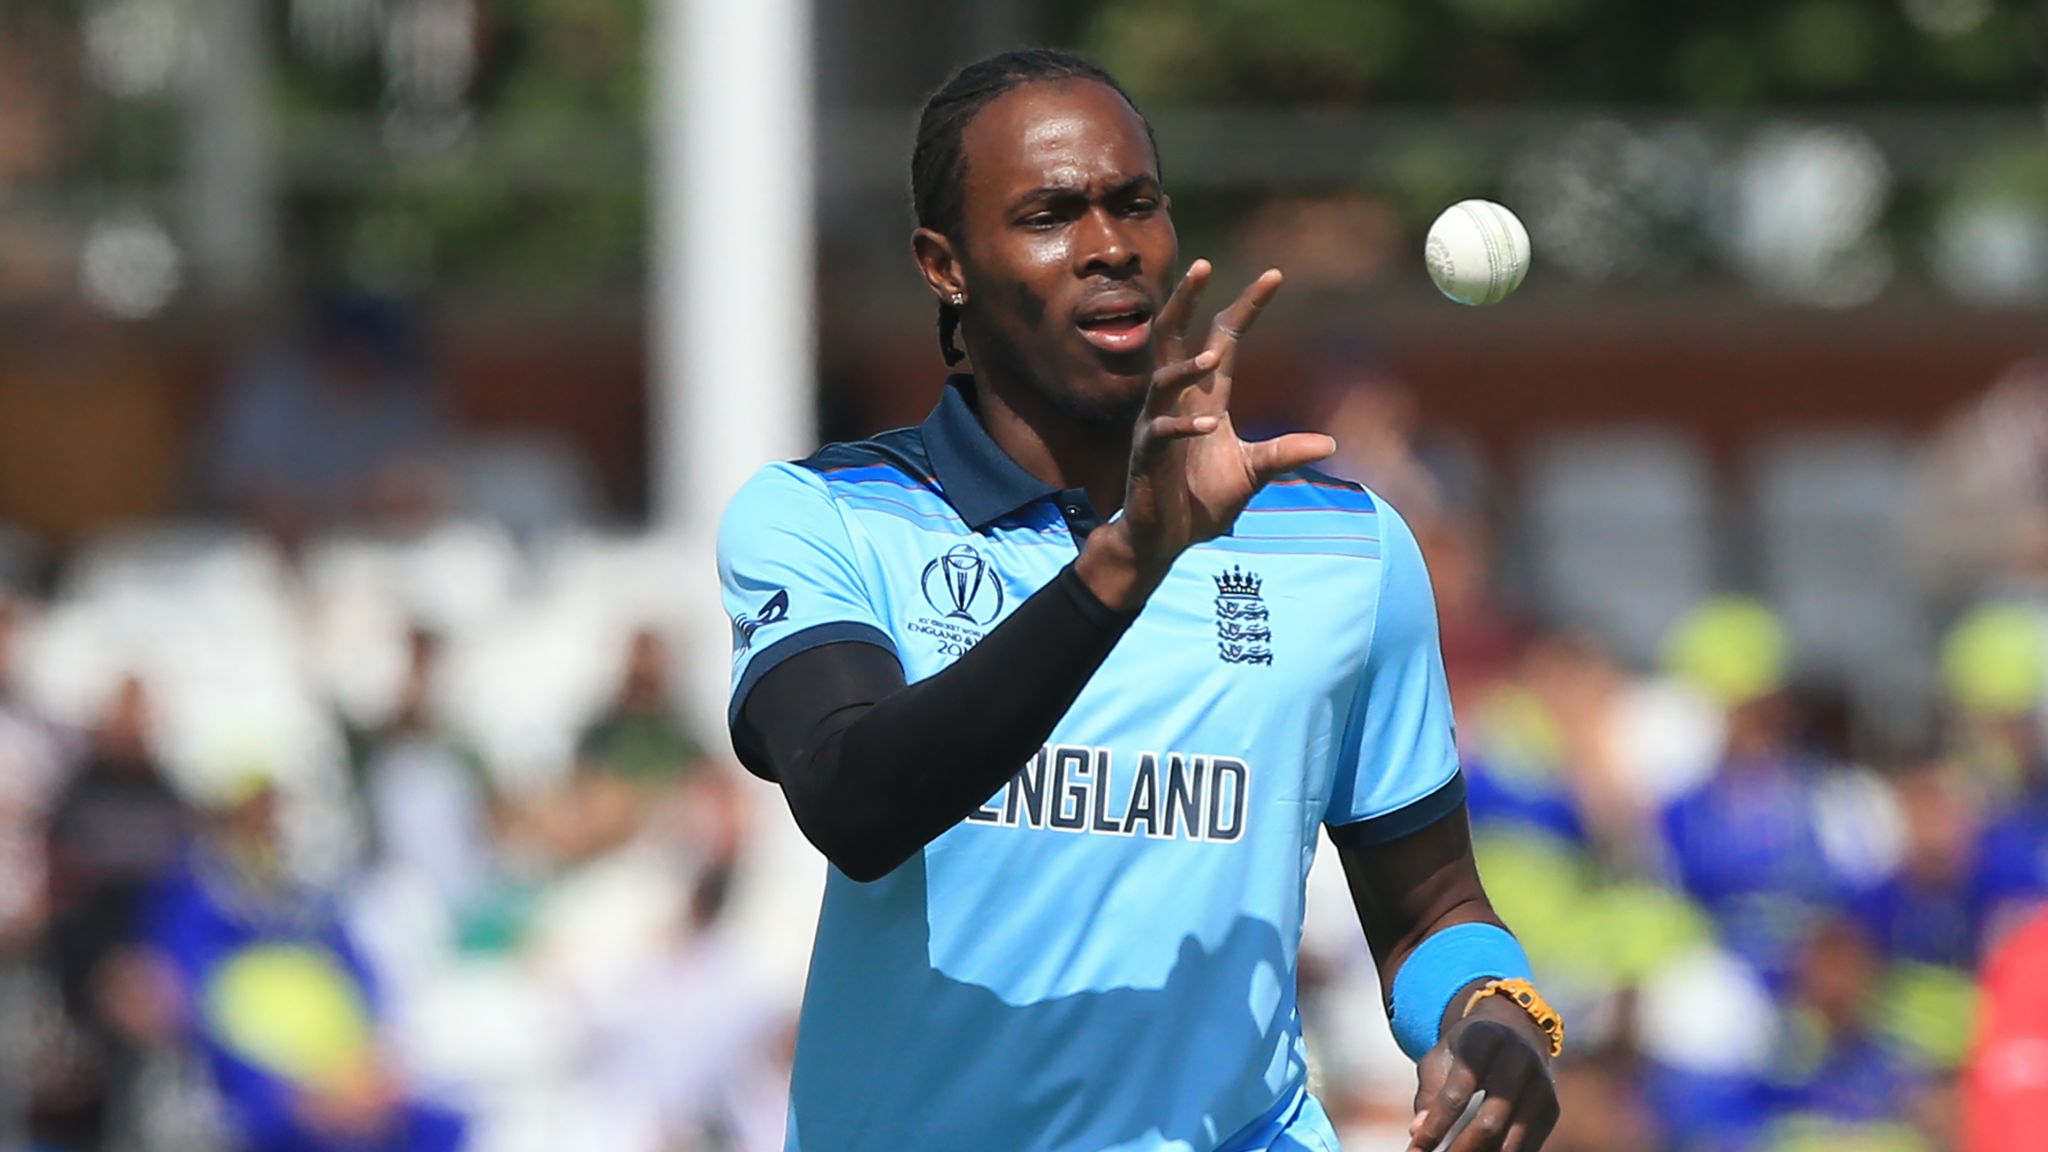 Jofra Archer: England crowd noise tough to replicate behind closed doors | Cricket News | Sky Sports